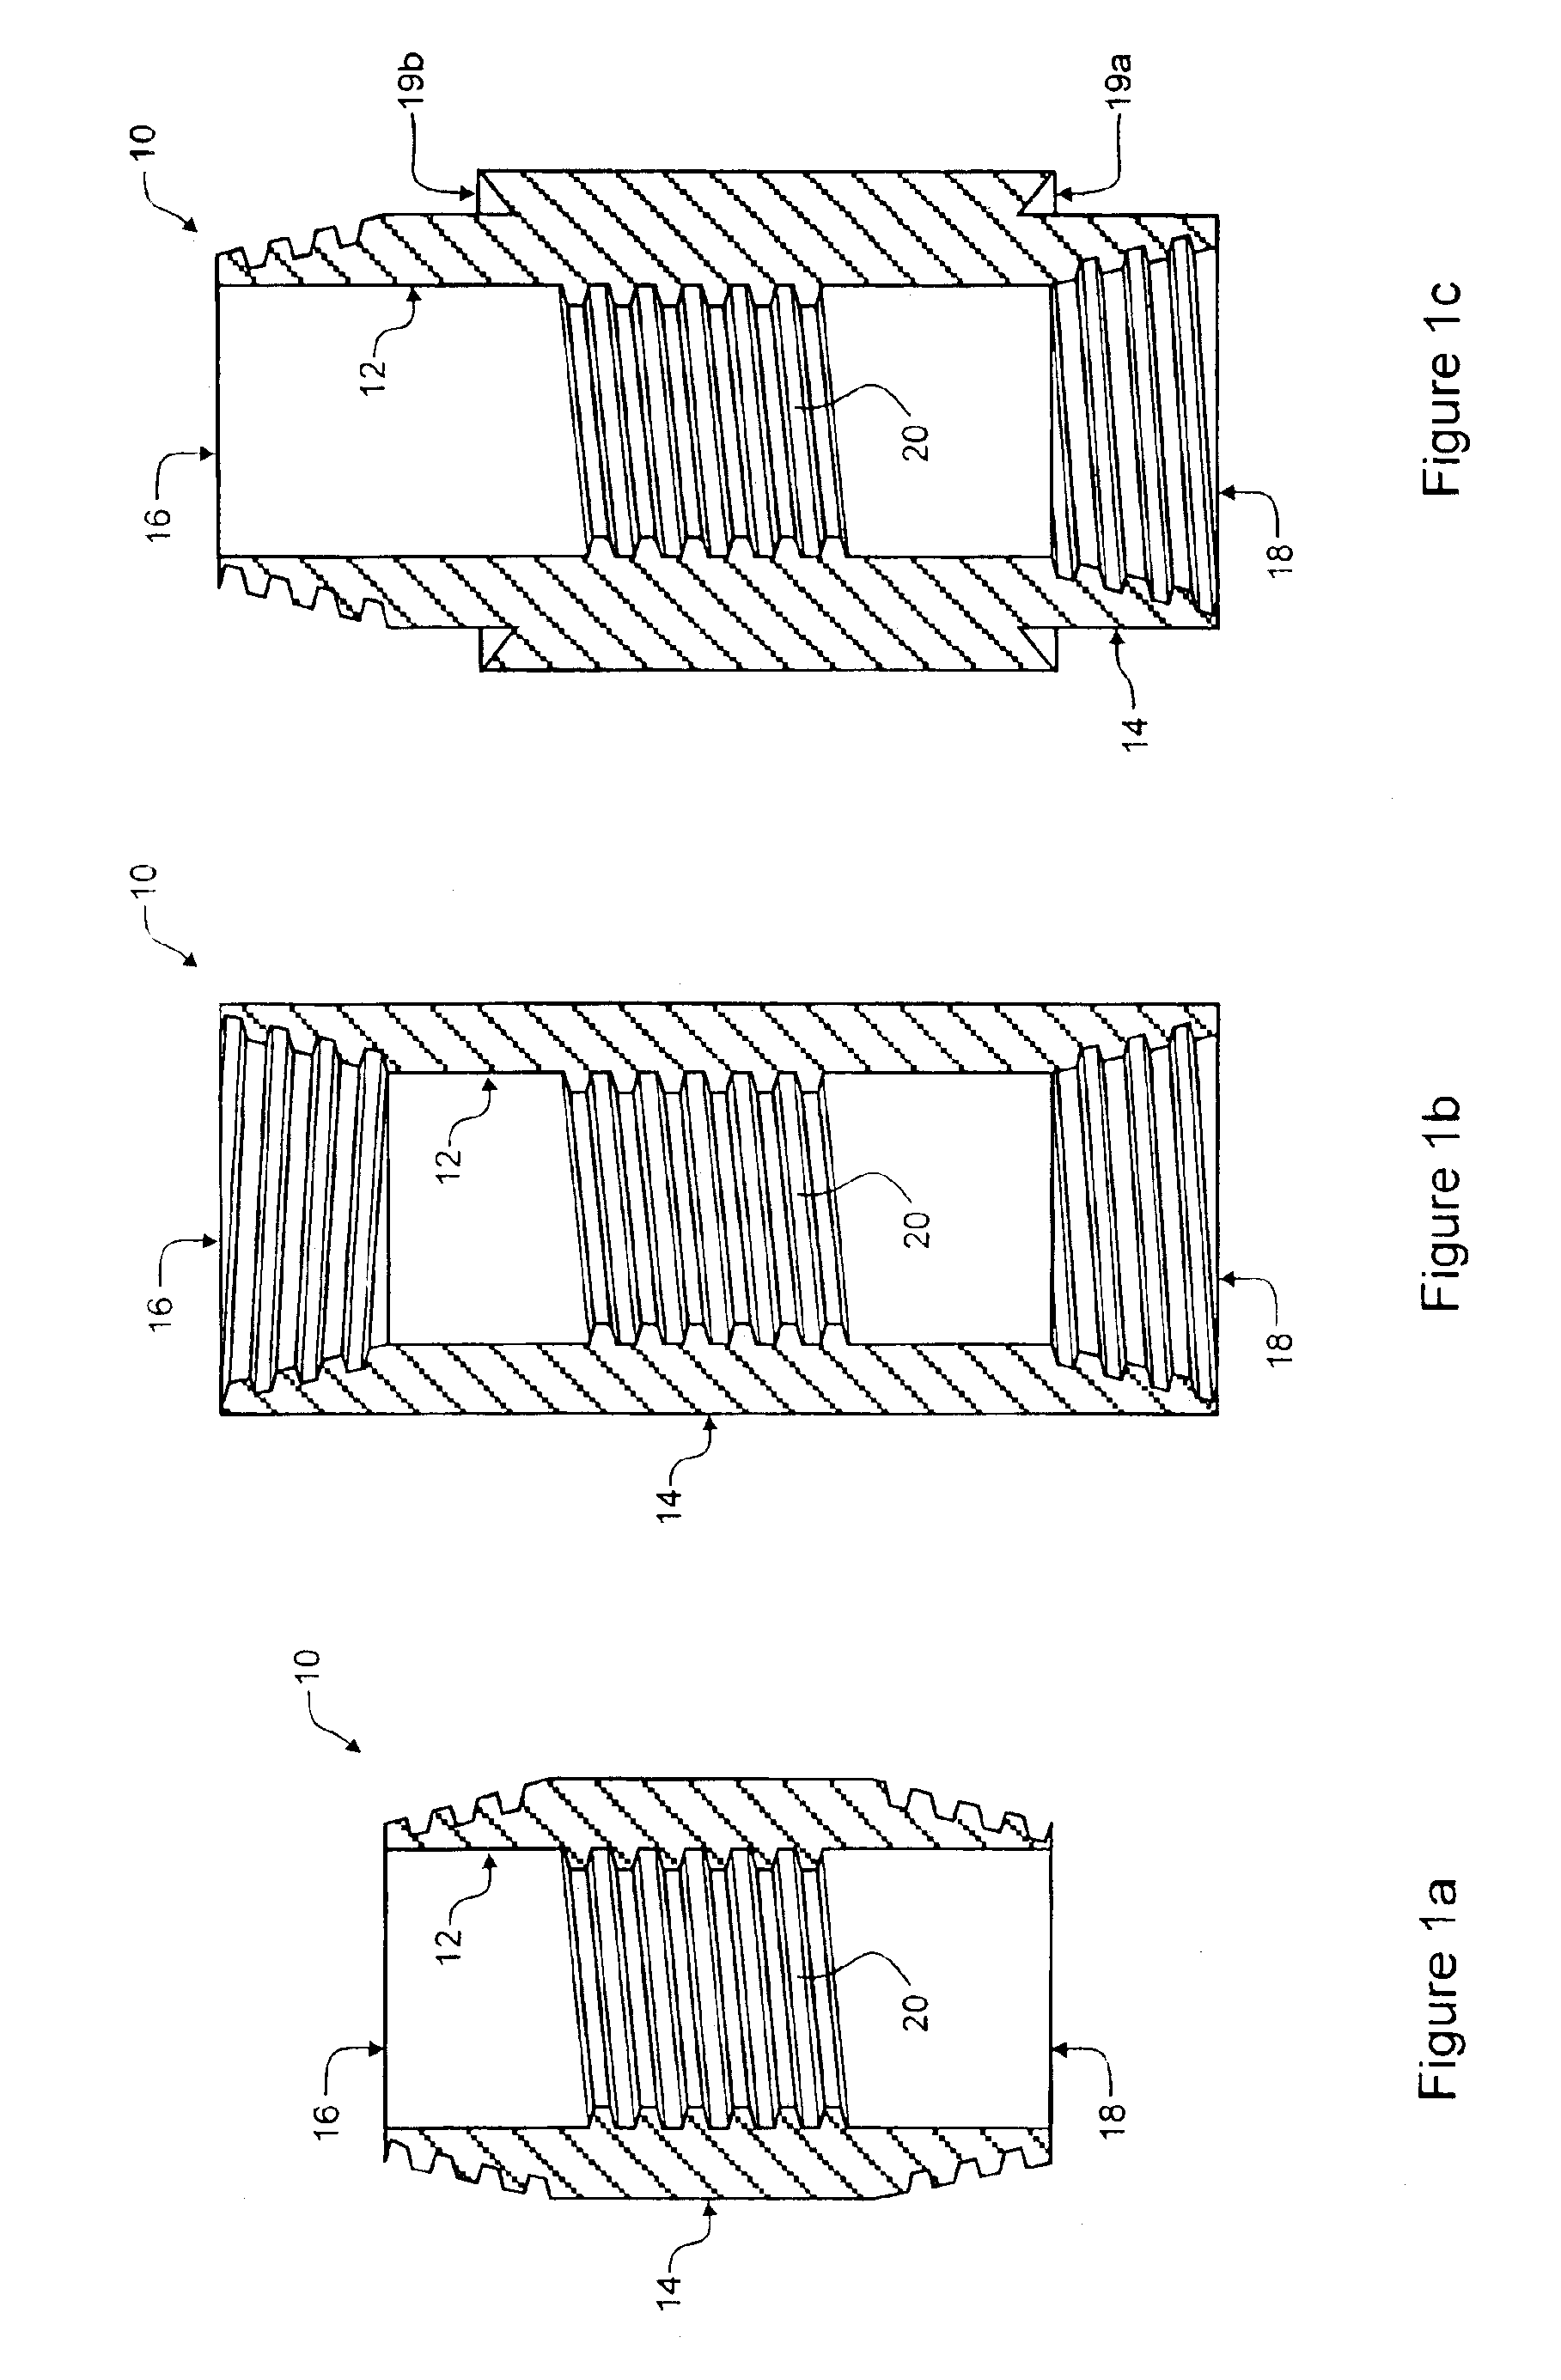 Backpressure adapter pin and methods of use